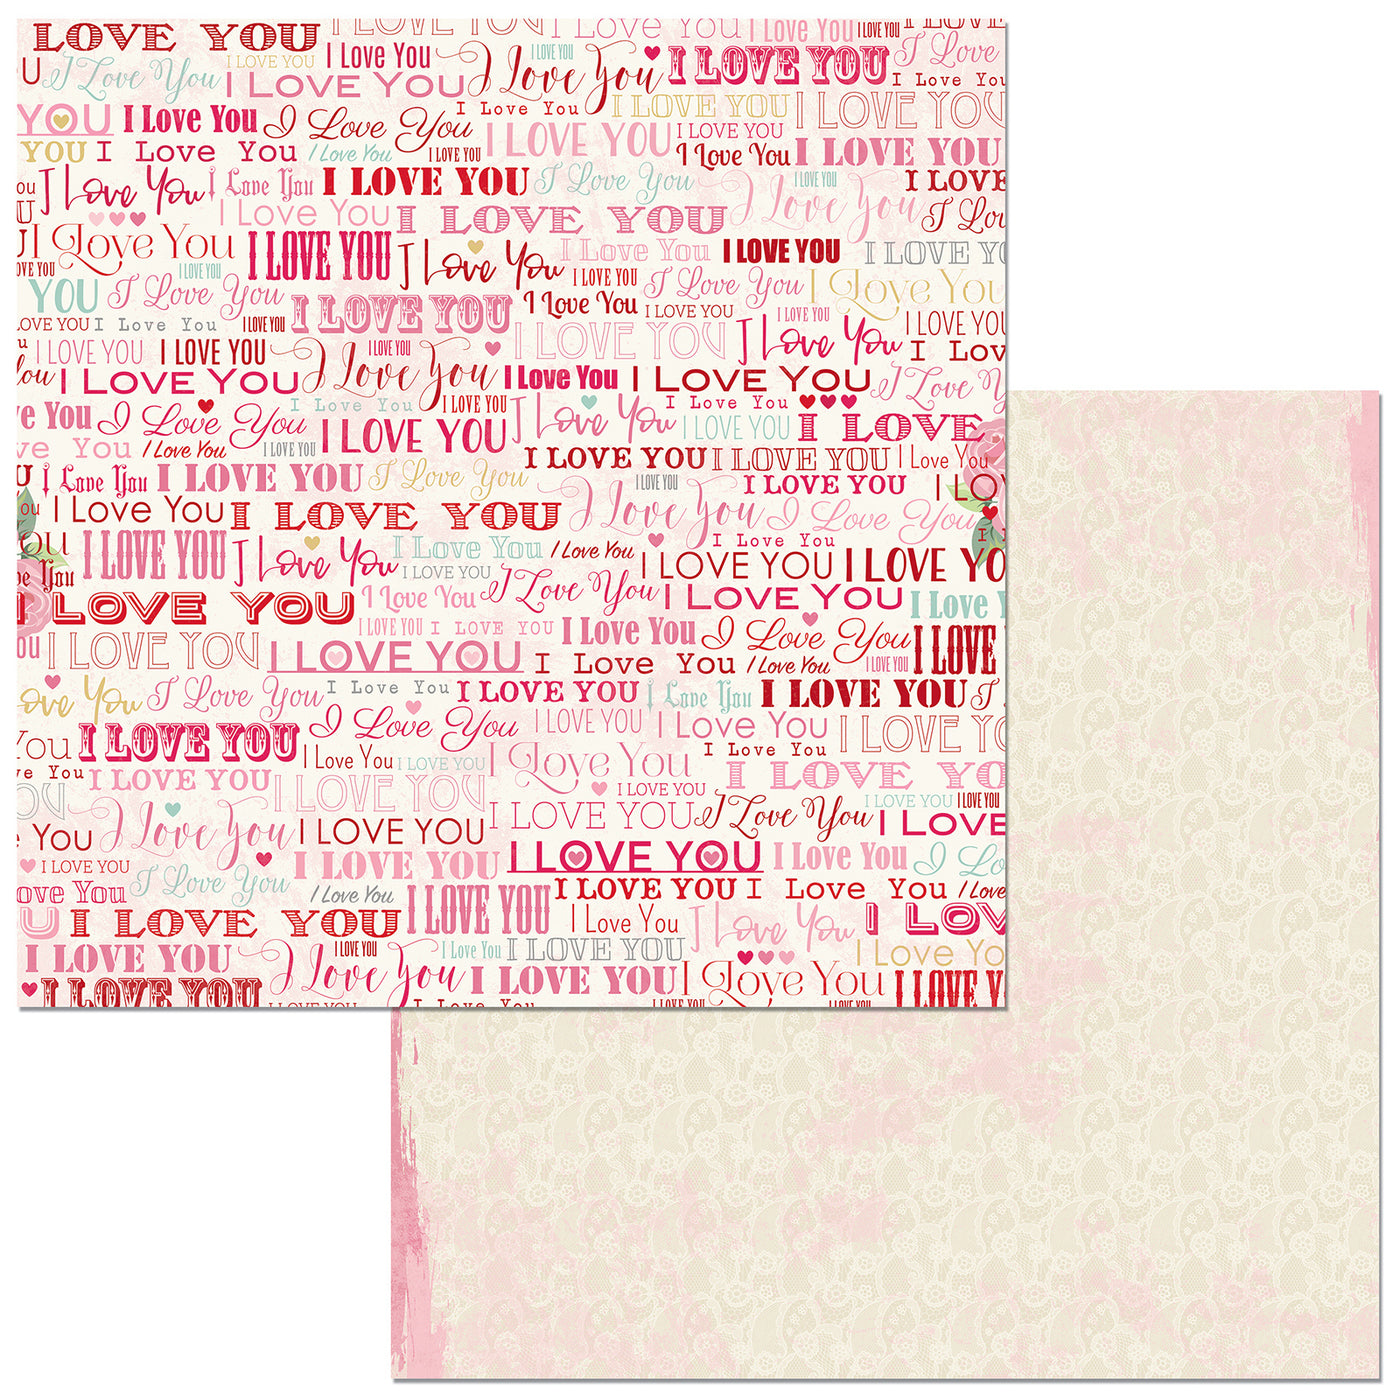 Multi-Colored (Side A - I love you phrases in soft pastels with shades of ivory, pink and red on a cream background, Side B - lace background in cream with pink distressing)